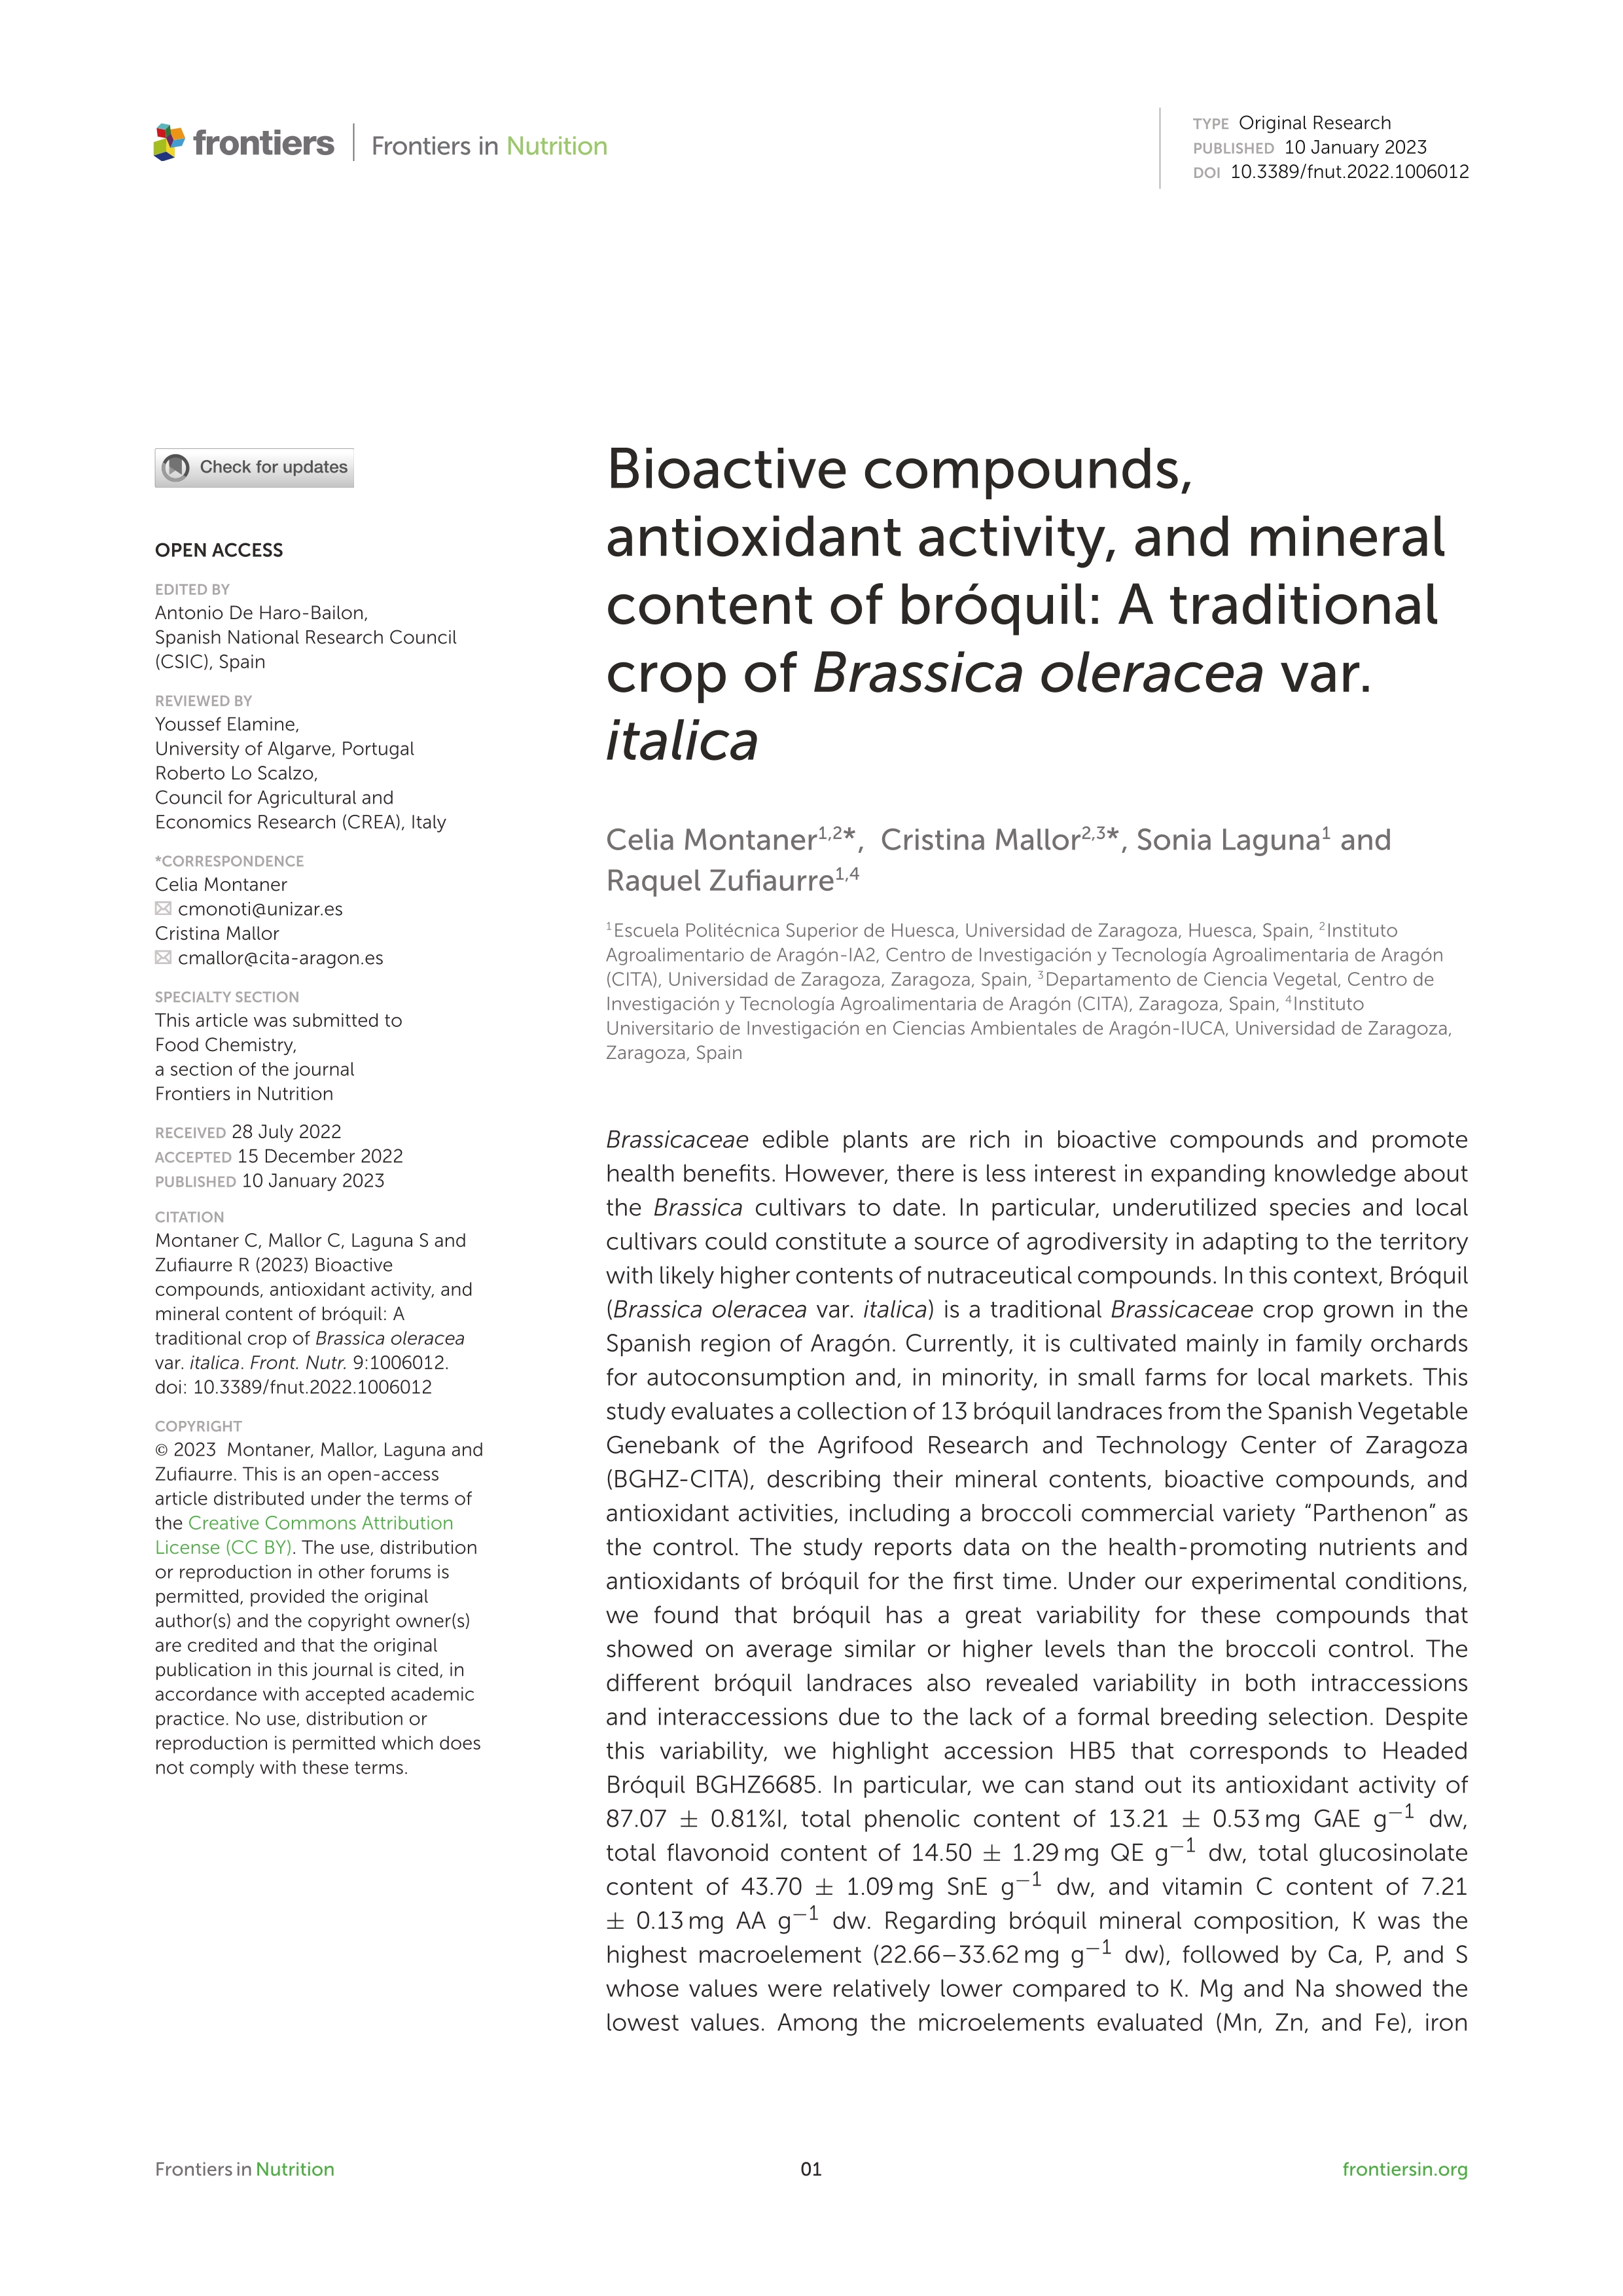 Bioactive compounds, antioxidant activity, and mineral content of bróquil: A traditional crop of Brassica oleracea var. italica